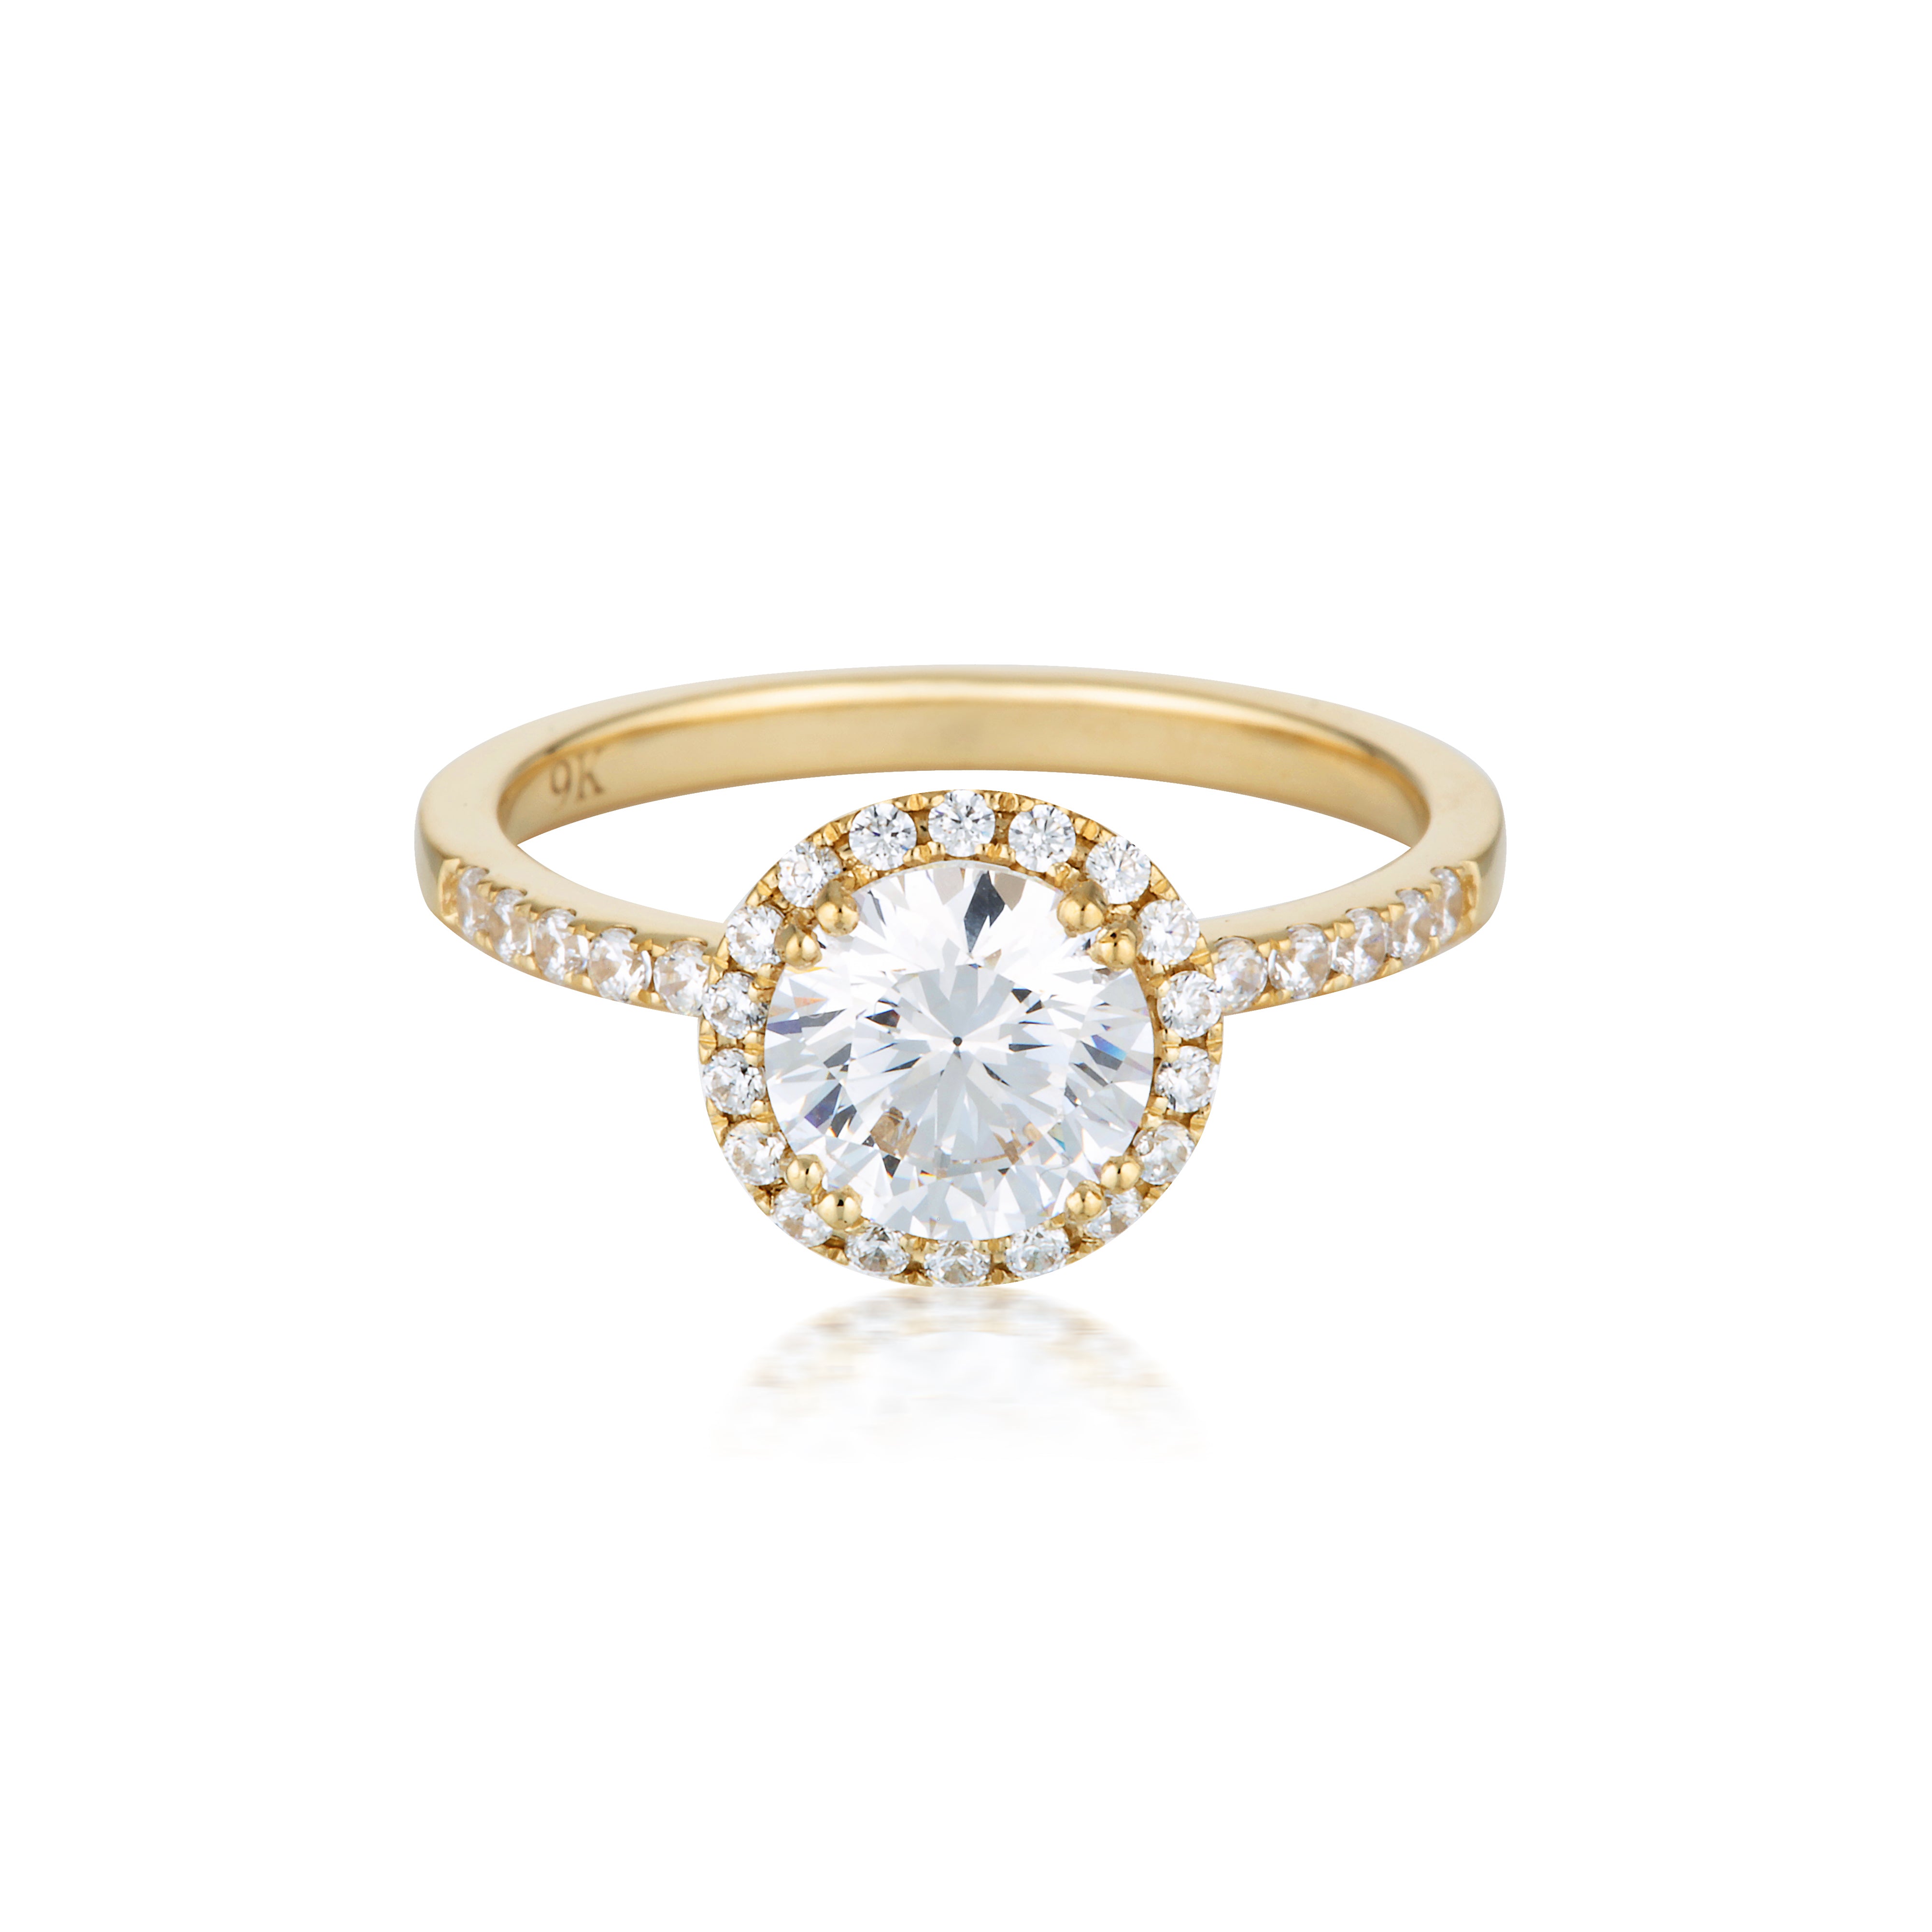 ROUND BRILLIANT CUT 1.25CTW MOISSANITE HALO ENGAGEMENT RING IN 9CT YELLOW GOLD